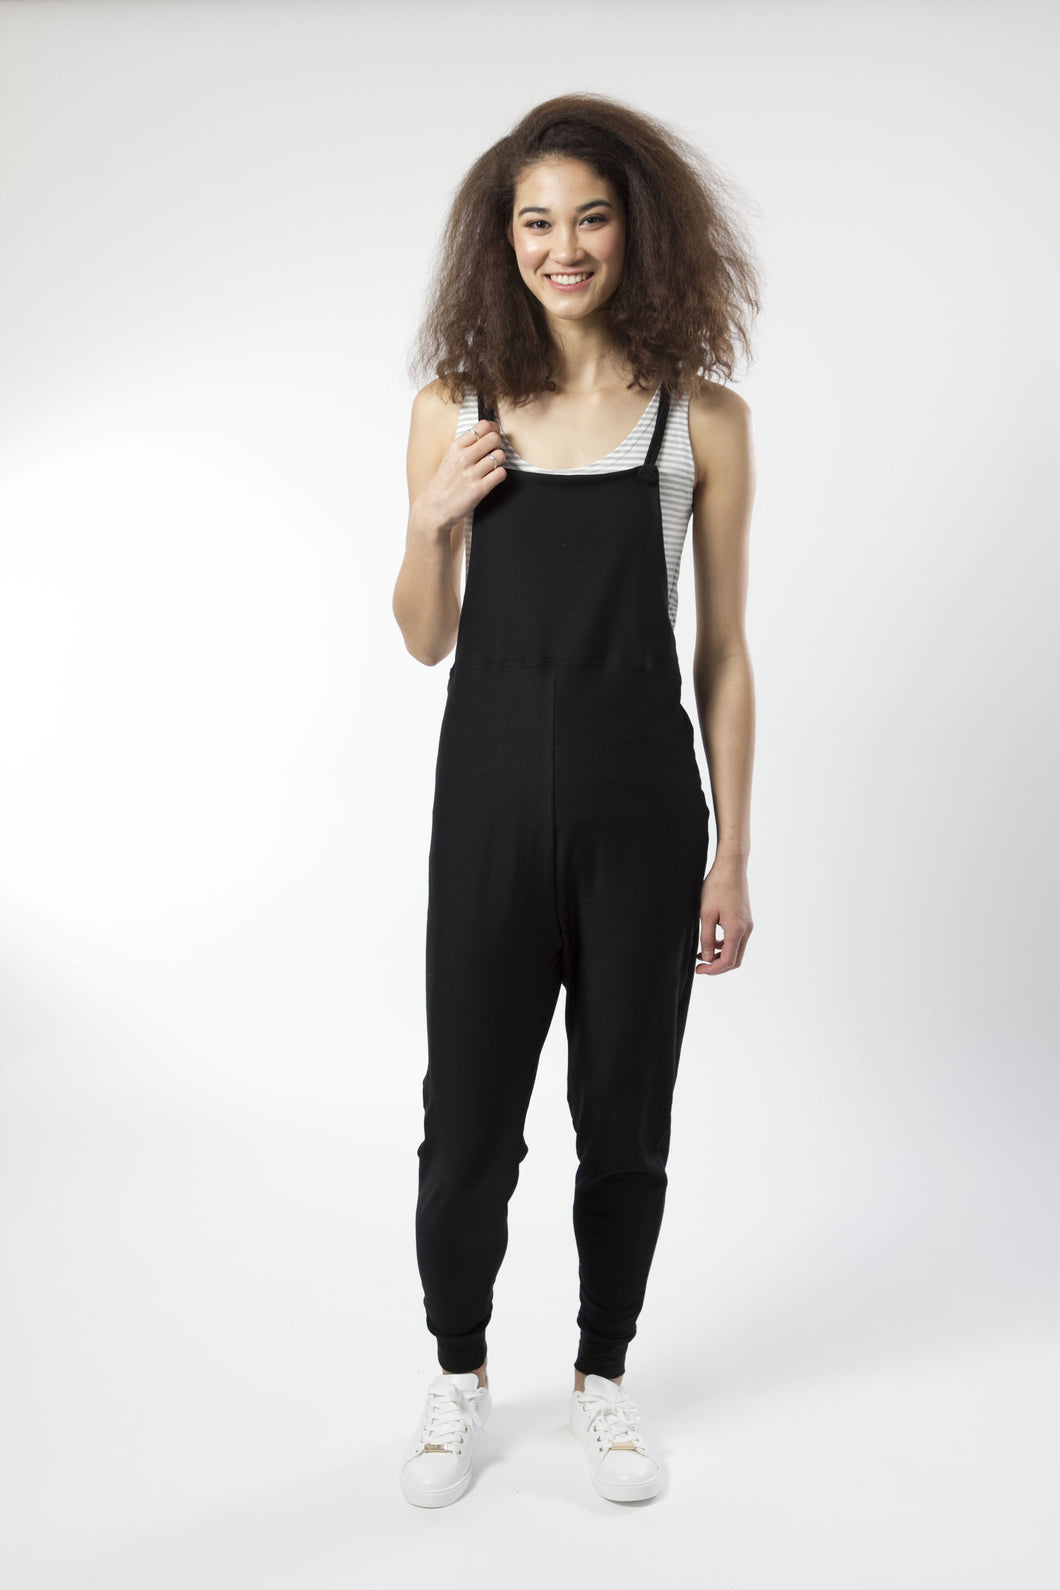 Spring Overalls - Various Colors (Women's)